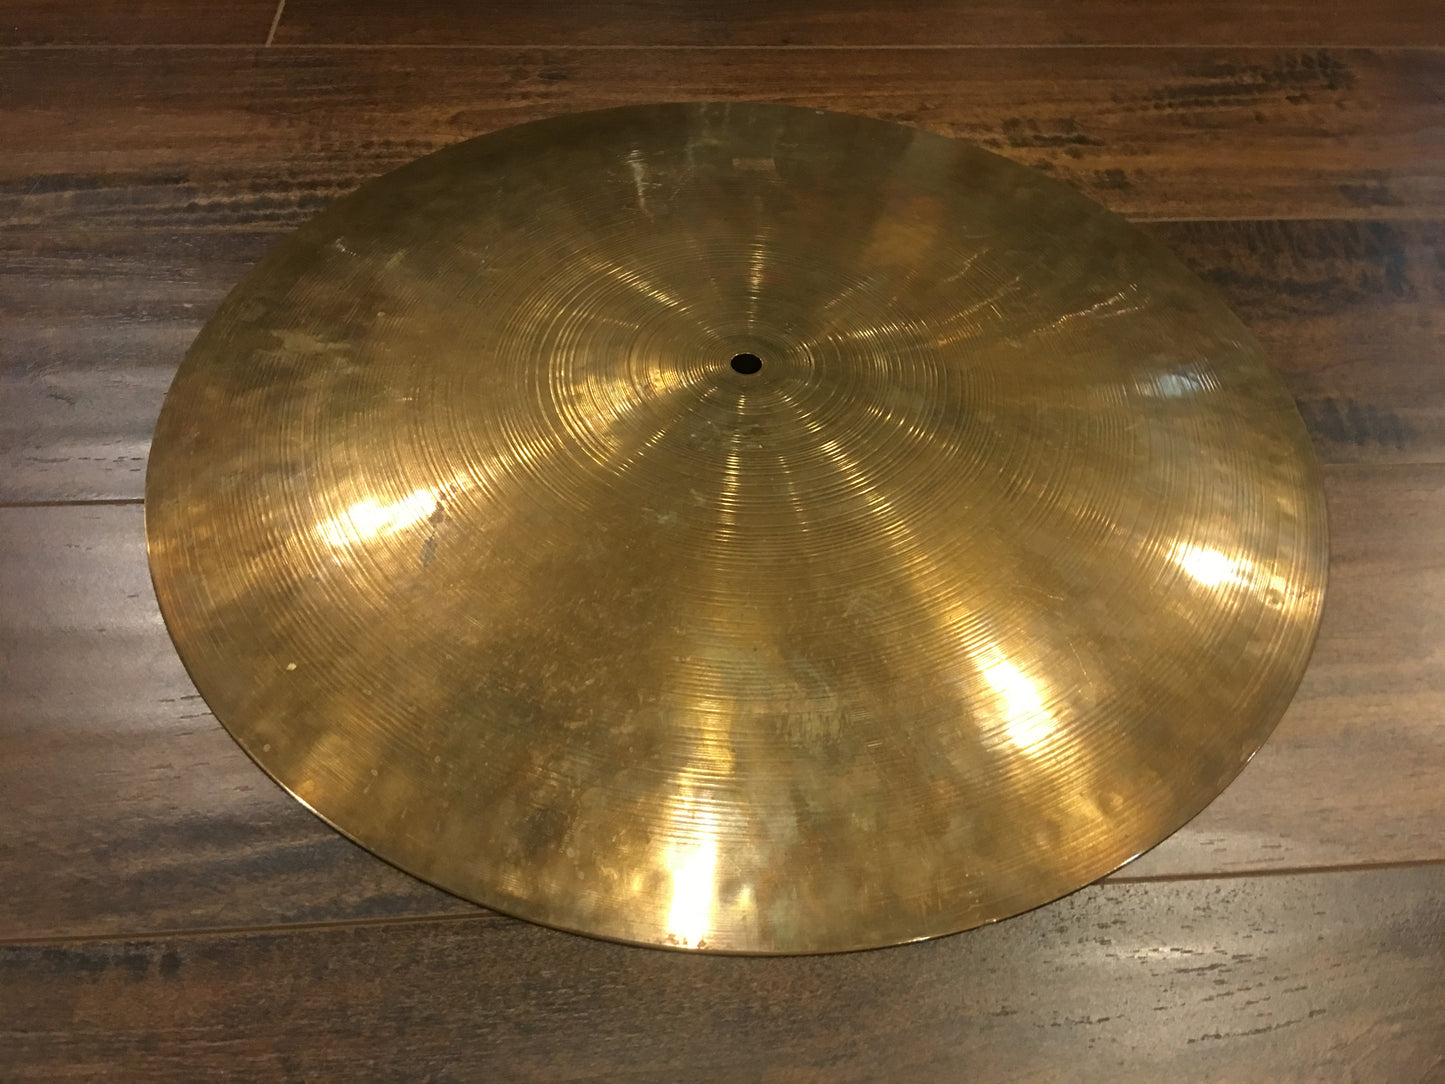 Vintage 1981 18" Paiste Flat Ride 2002 Red Label Cymbal 1580g